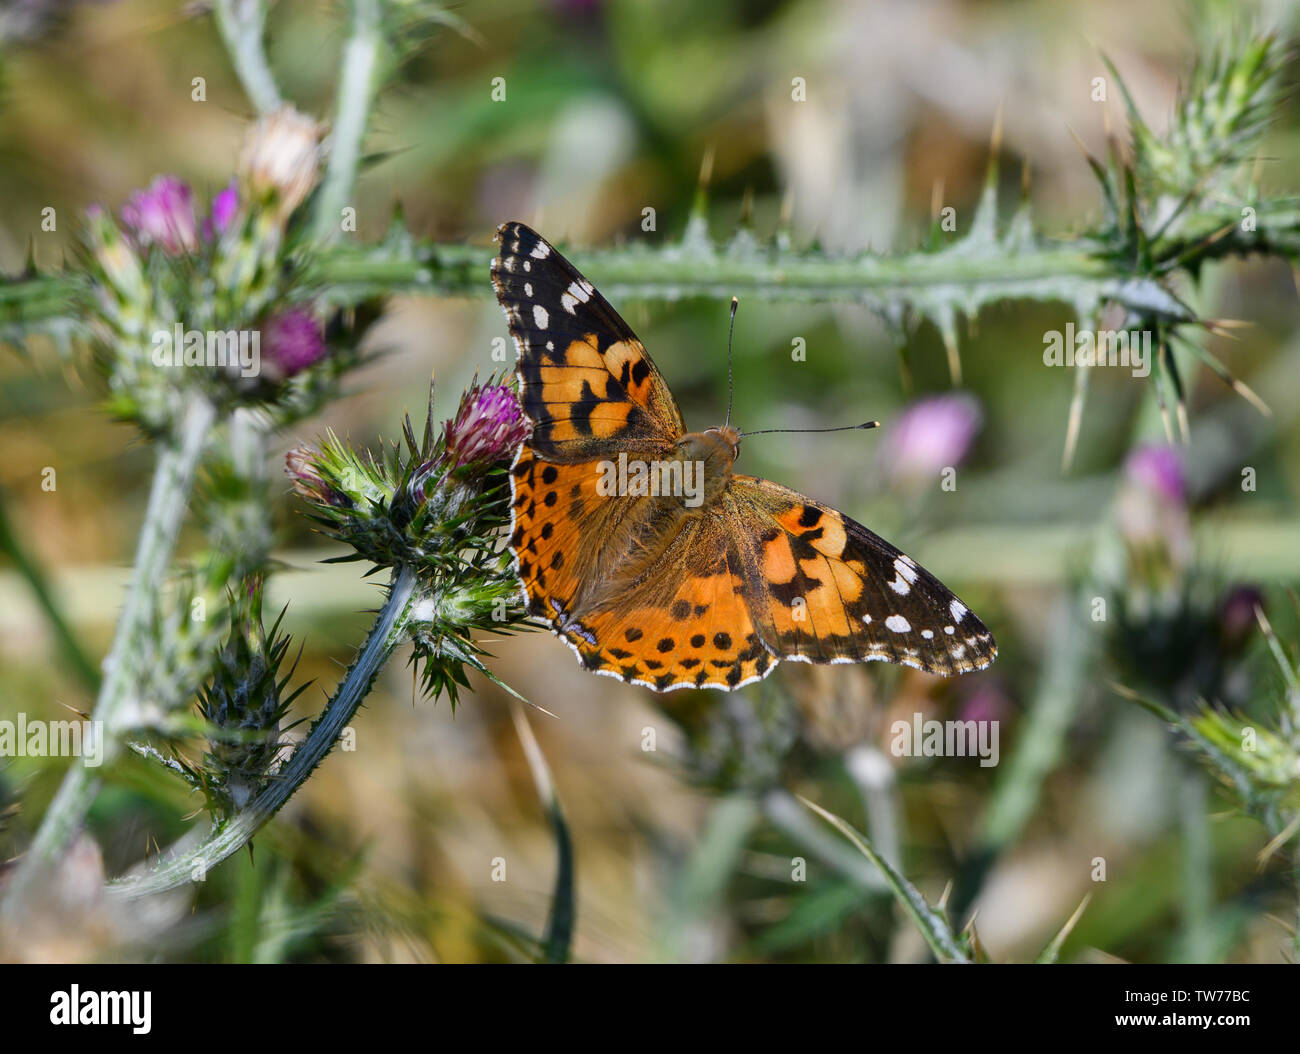 'Painted Lady' Butterfly (Vanessa annabella) foraging on wild flowers. California, USA. Stock Photo